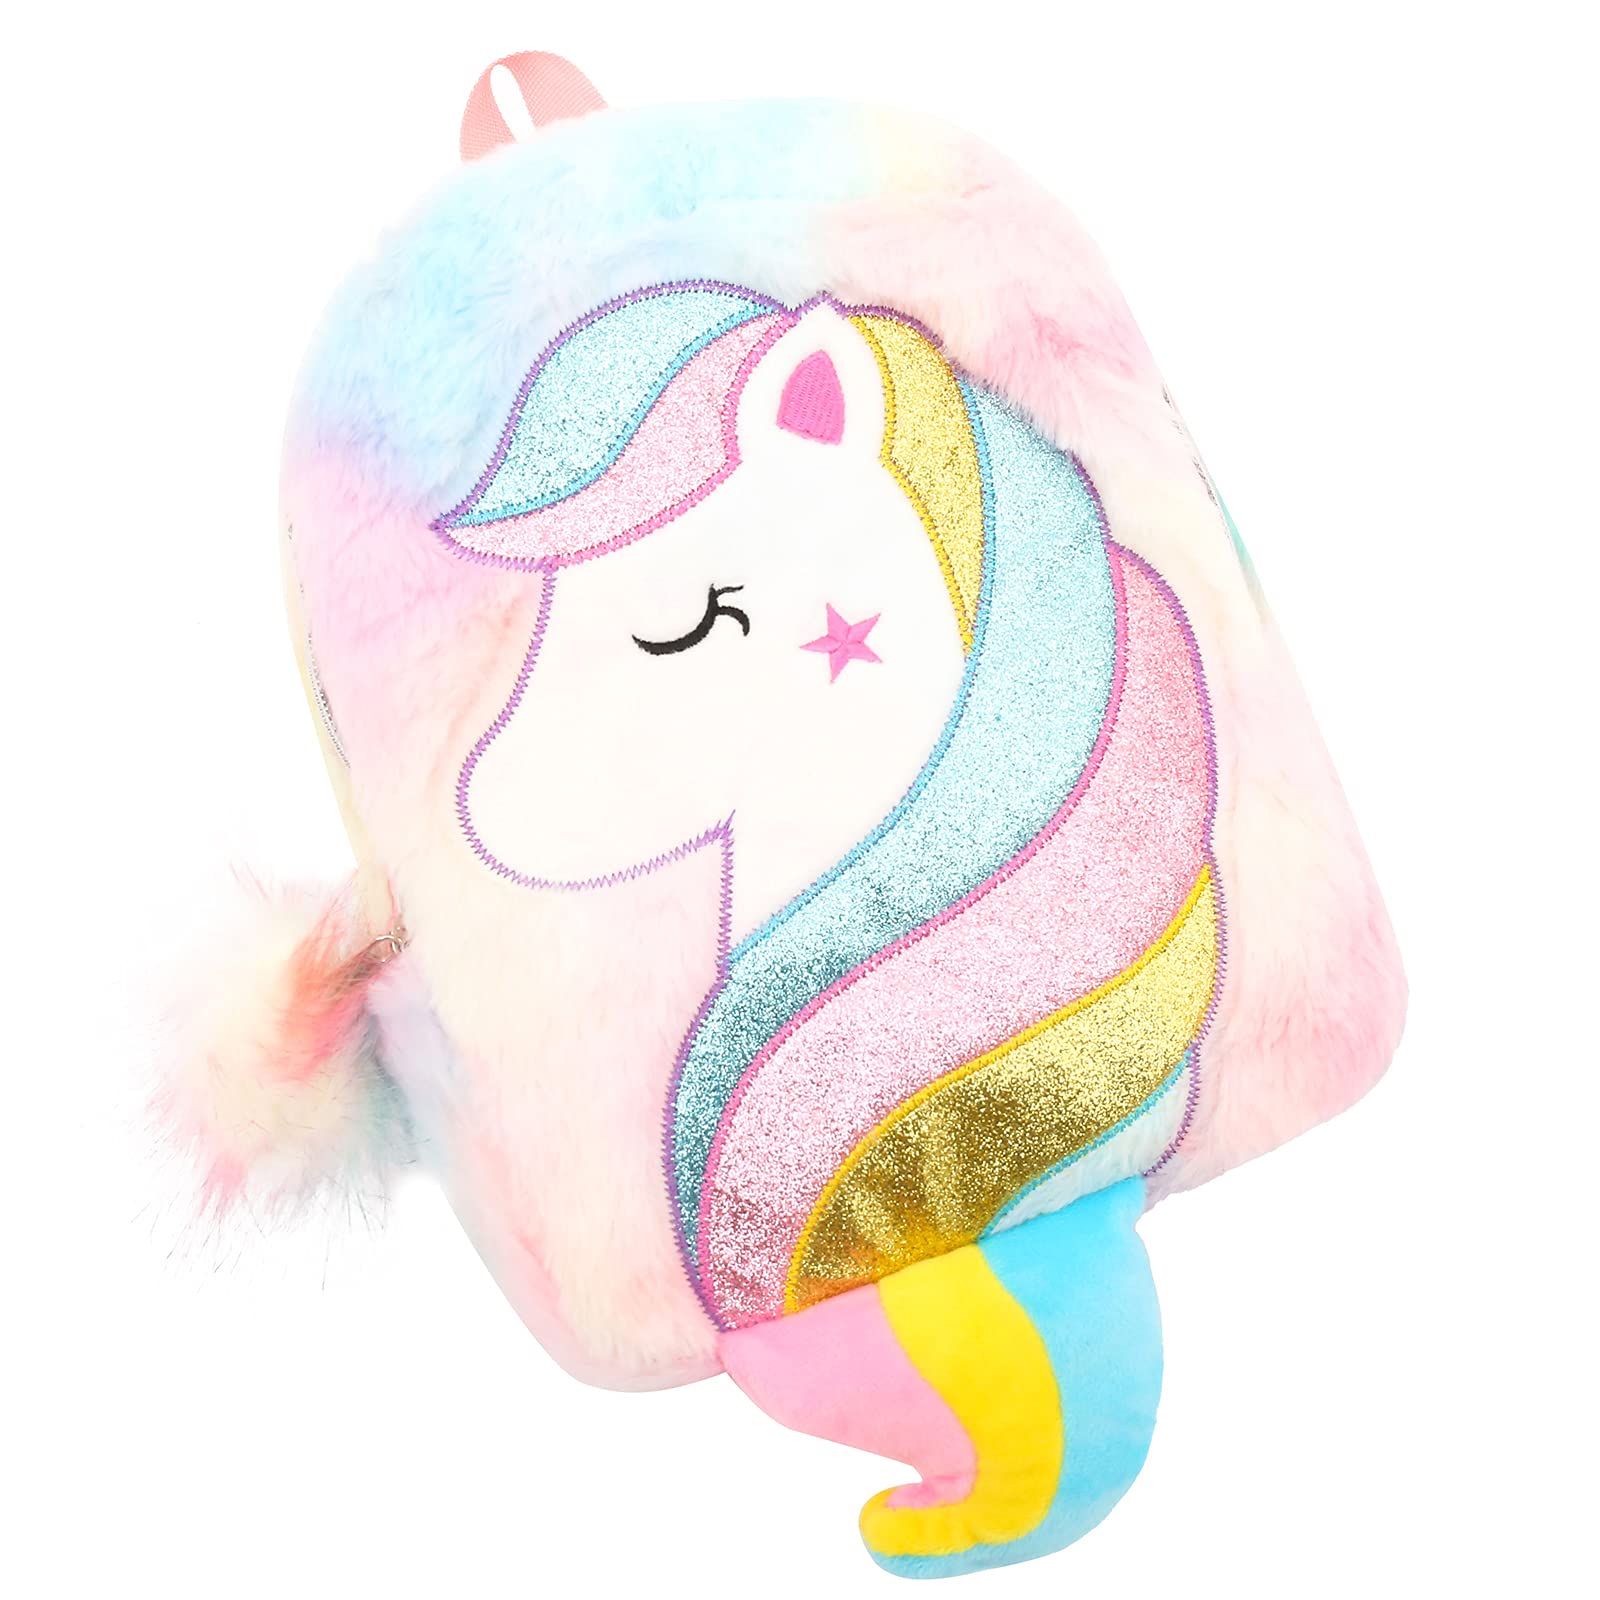 HICCUPfish CBOALOGR Cute Plush Unicorn Toddler Mini Travel Bag Princess Plush Backpack for Girls 1-6 years old (Tail-colored)…